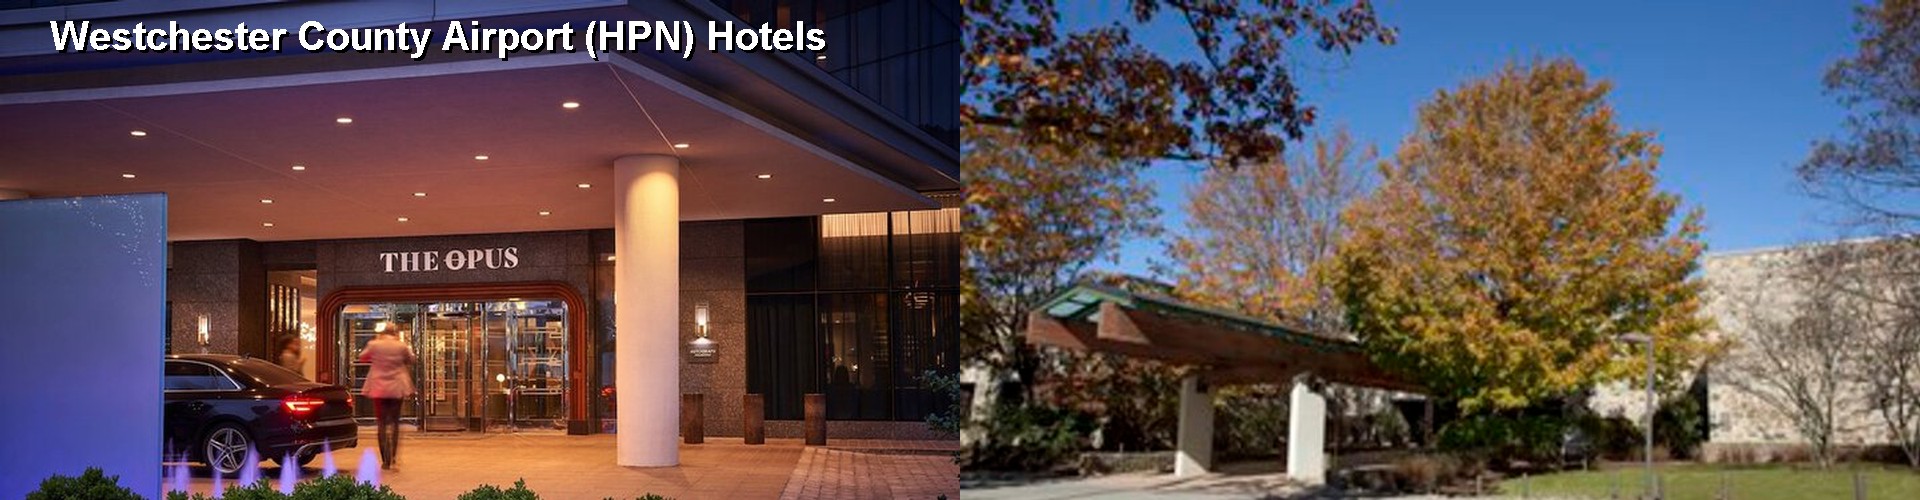 5 Best Hotels near Westchester County Airport (HPN)